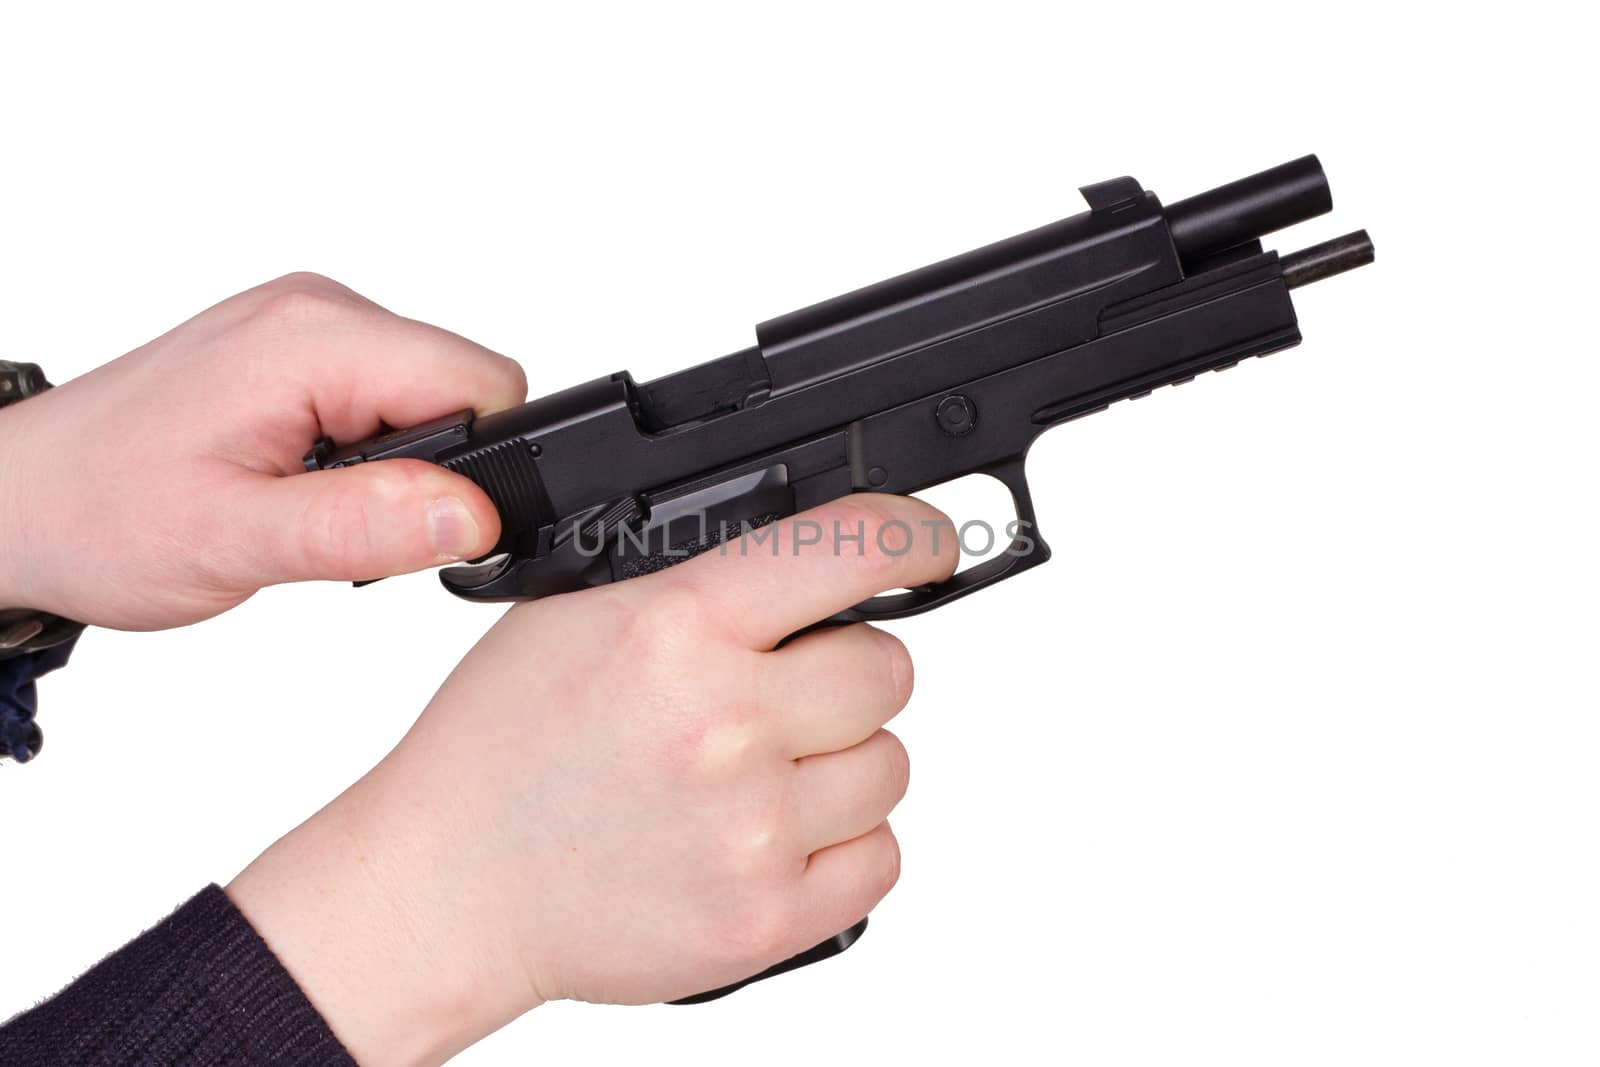 man, getting on the hip a pistol, on a white background